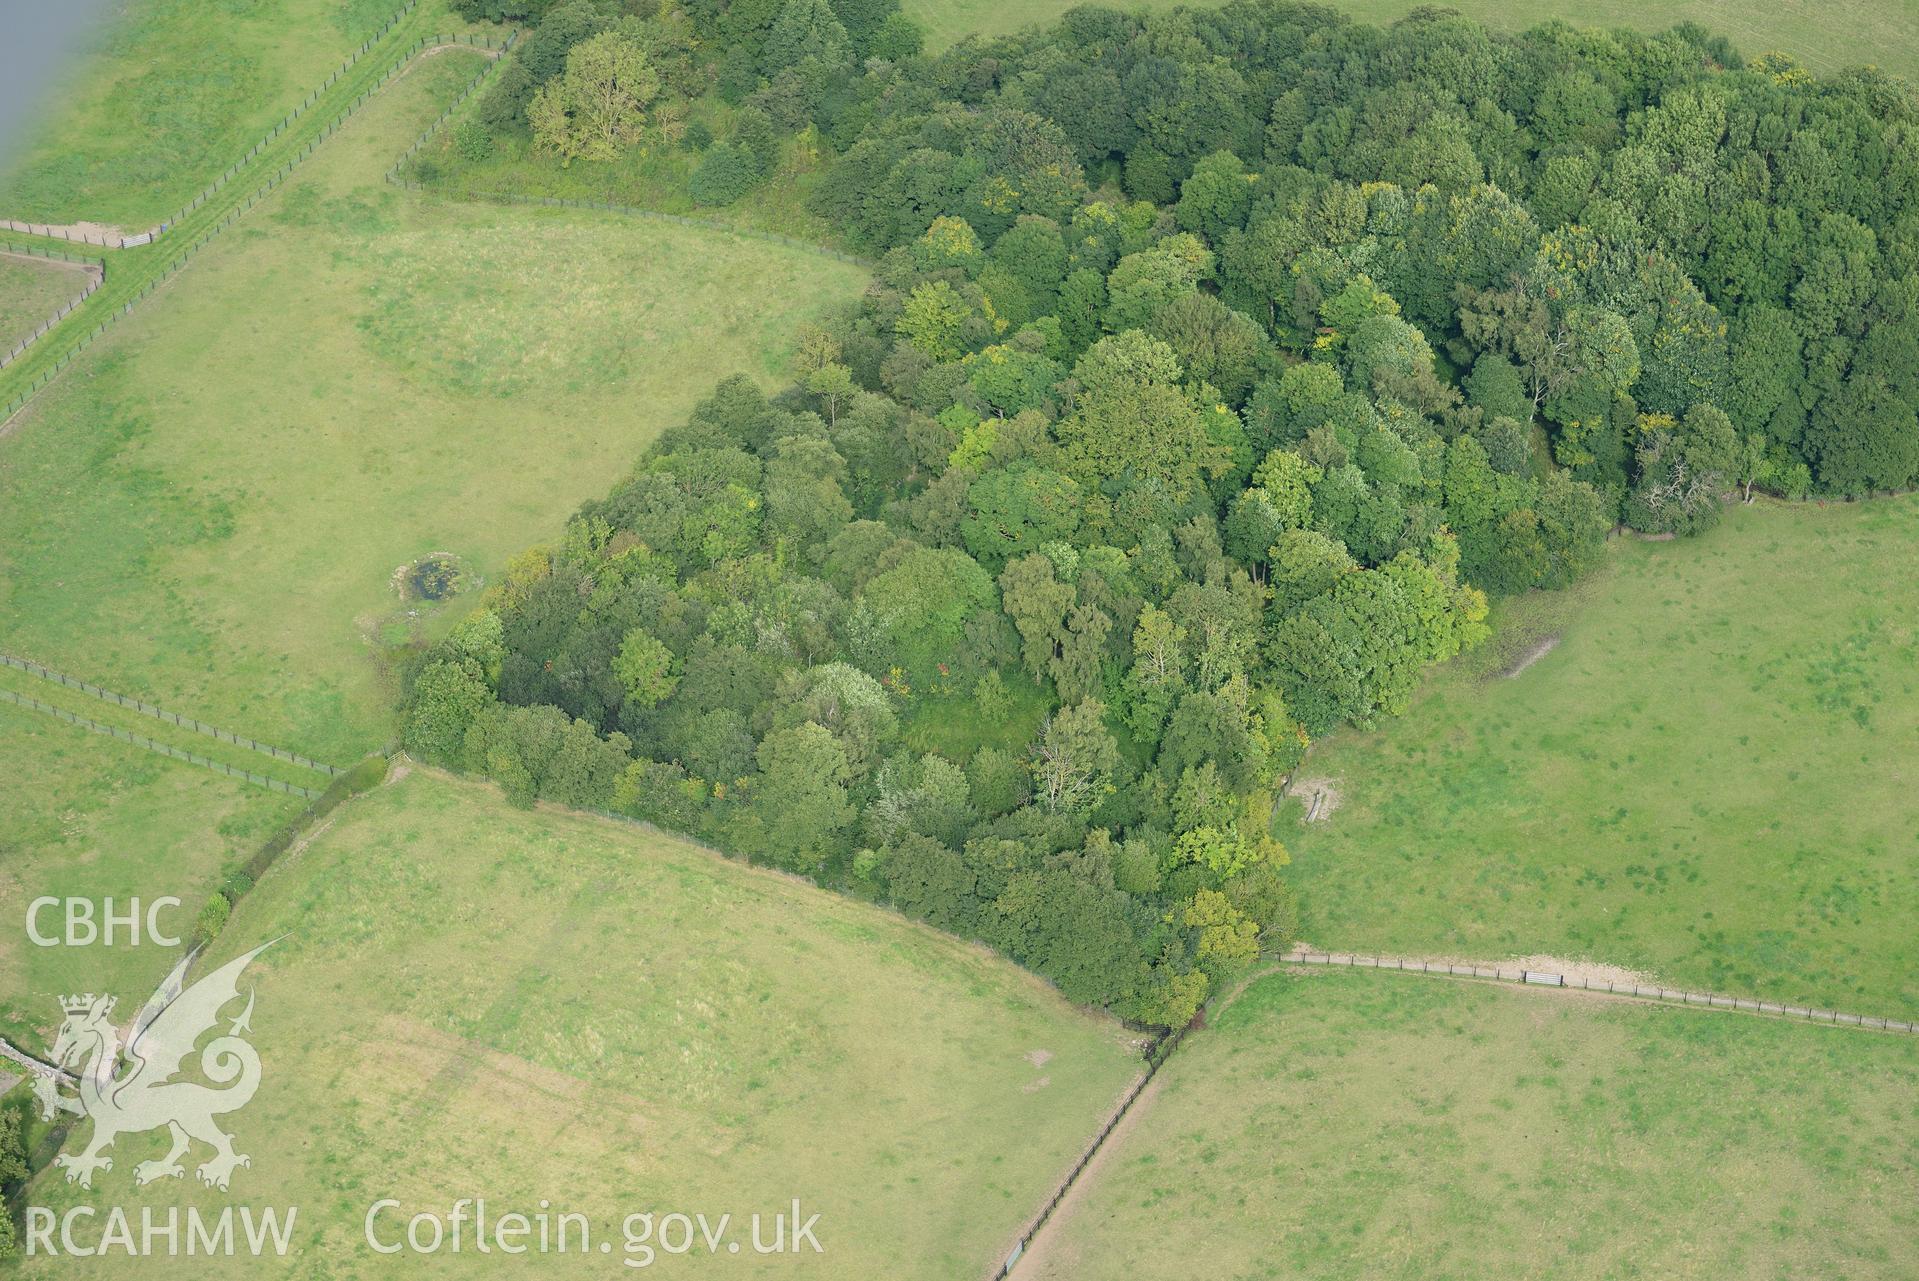 Hafod Wood moated site, Halkyn, near Holywell. Oblique aerial photograph taken during the Royal Commission's programme of archaeological aerial reconnaissance by Toby Driver on 11th September 2015.